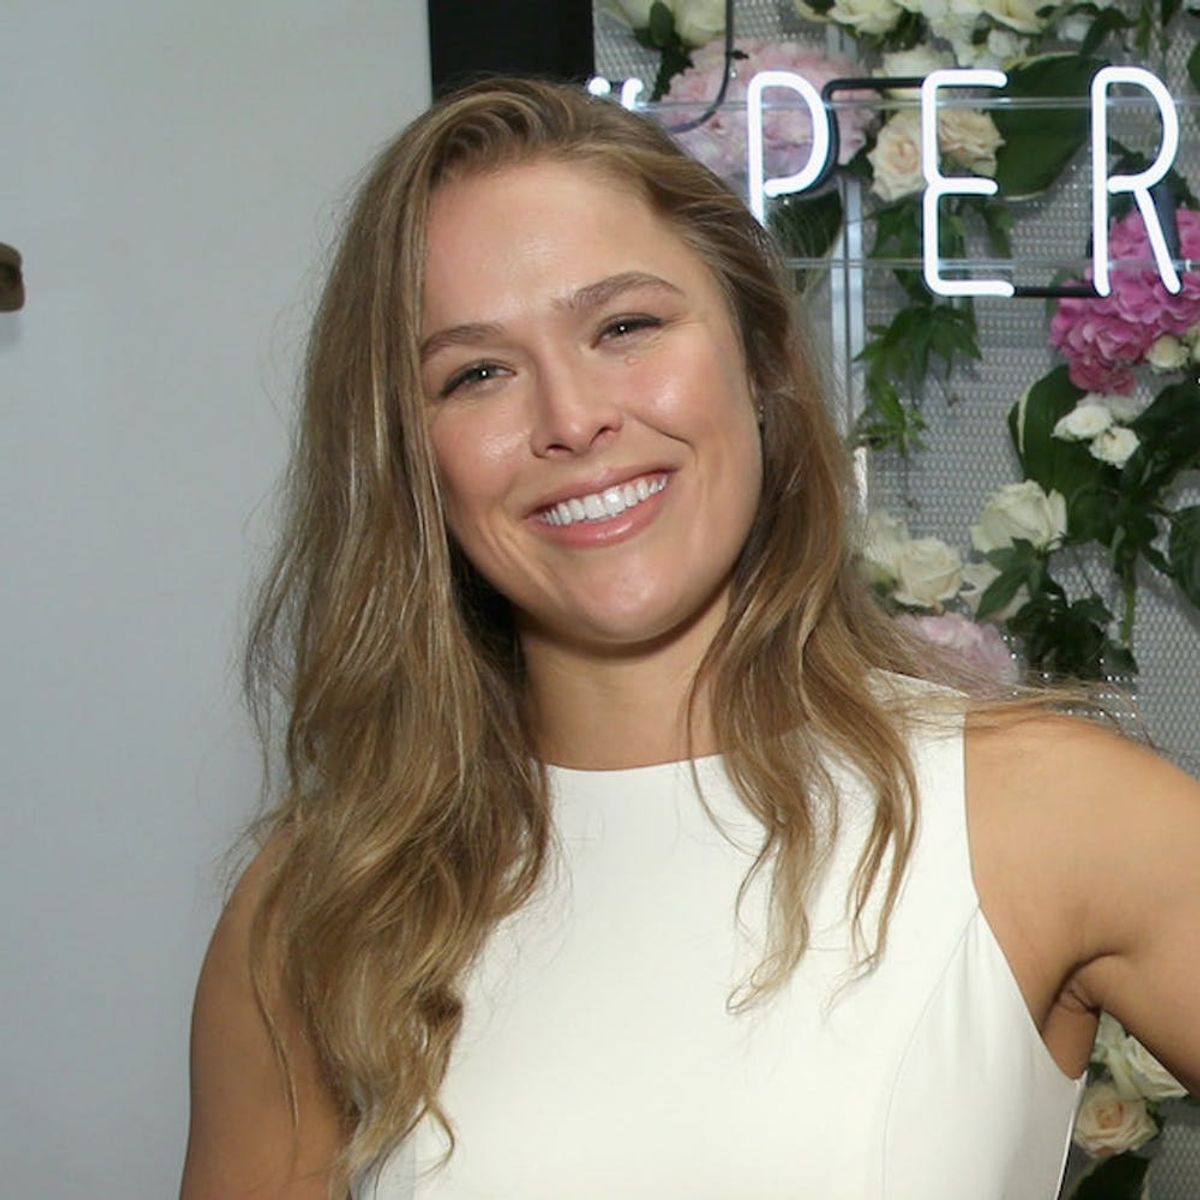 Morning Buzz! Ronda Rousey Reveals She’s Engaged by Casually Showing off Her Gorgeous Diamond + More